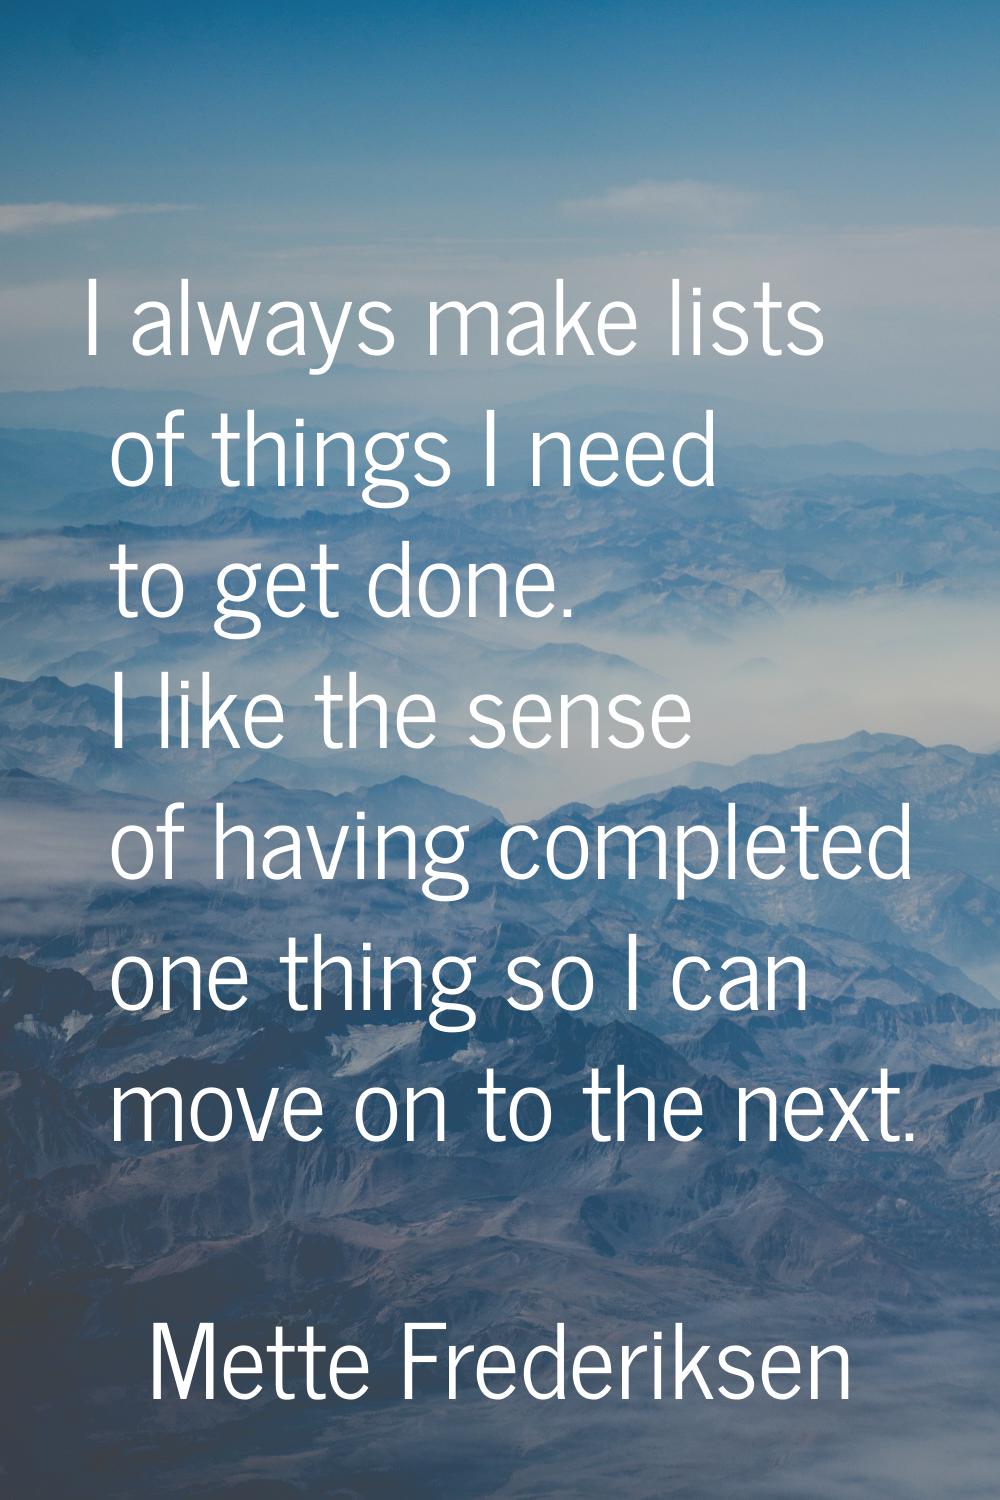 I always make lists of things I need to get done. I like the sense of having completed one thing so